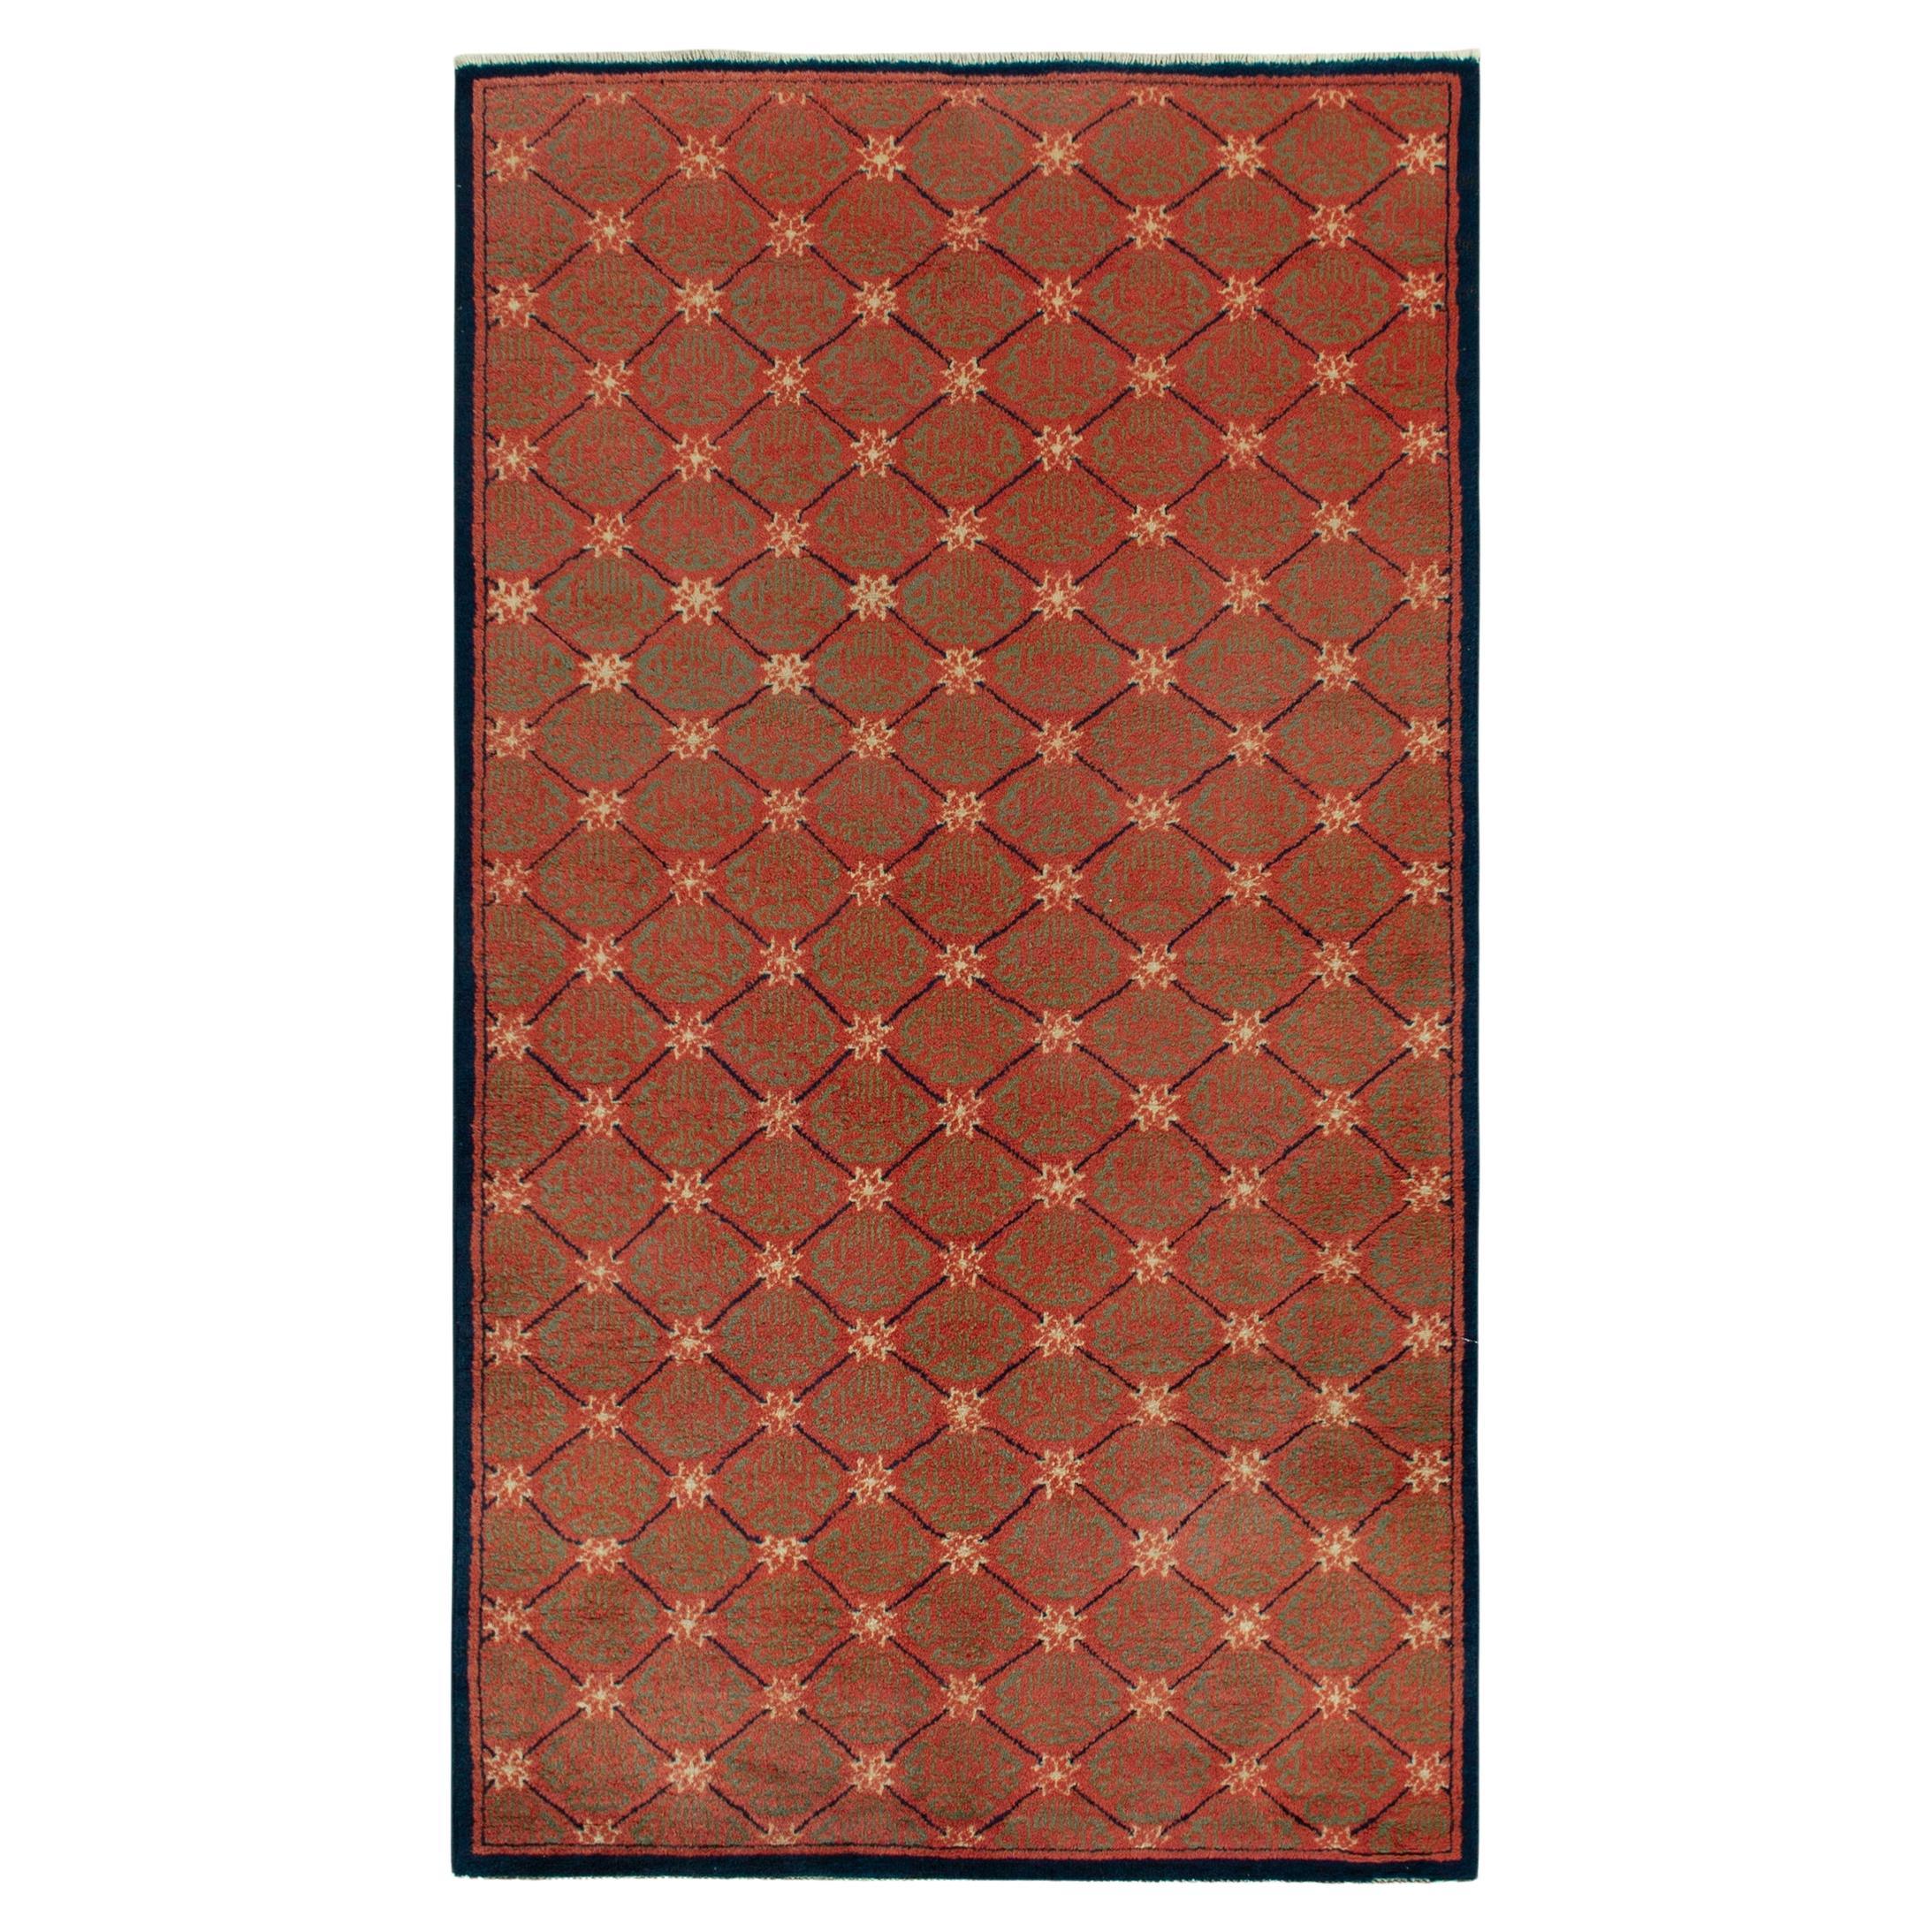 1960s Vintage Art Deco Rug in Red, Green Patterns and Blue Border by Rug & Kilim For Sale